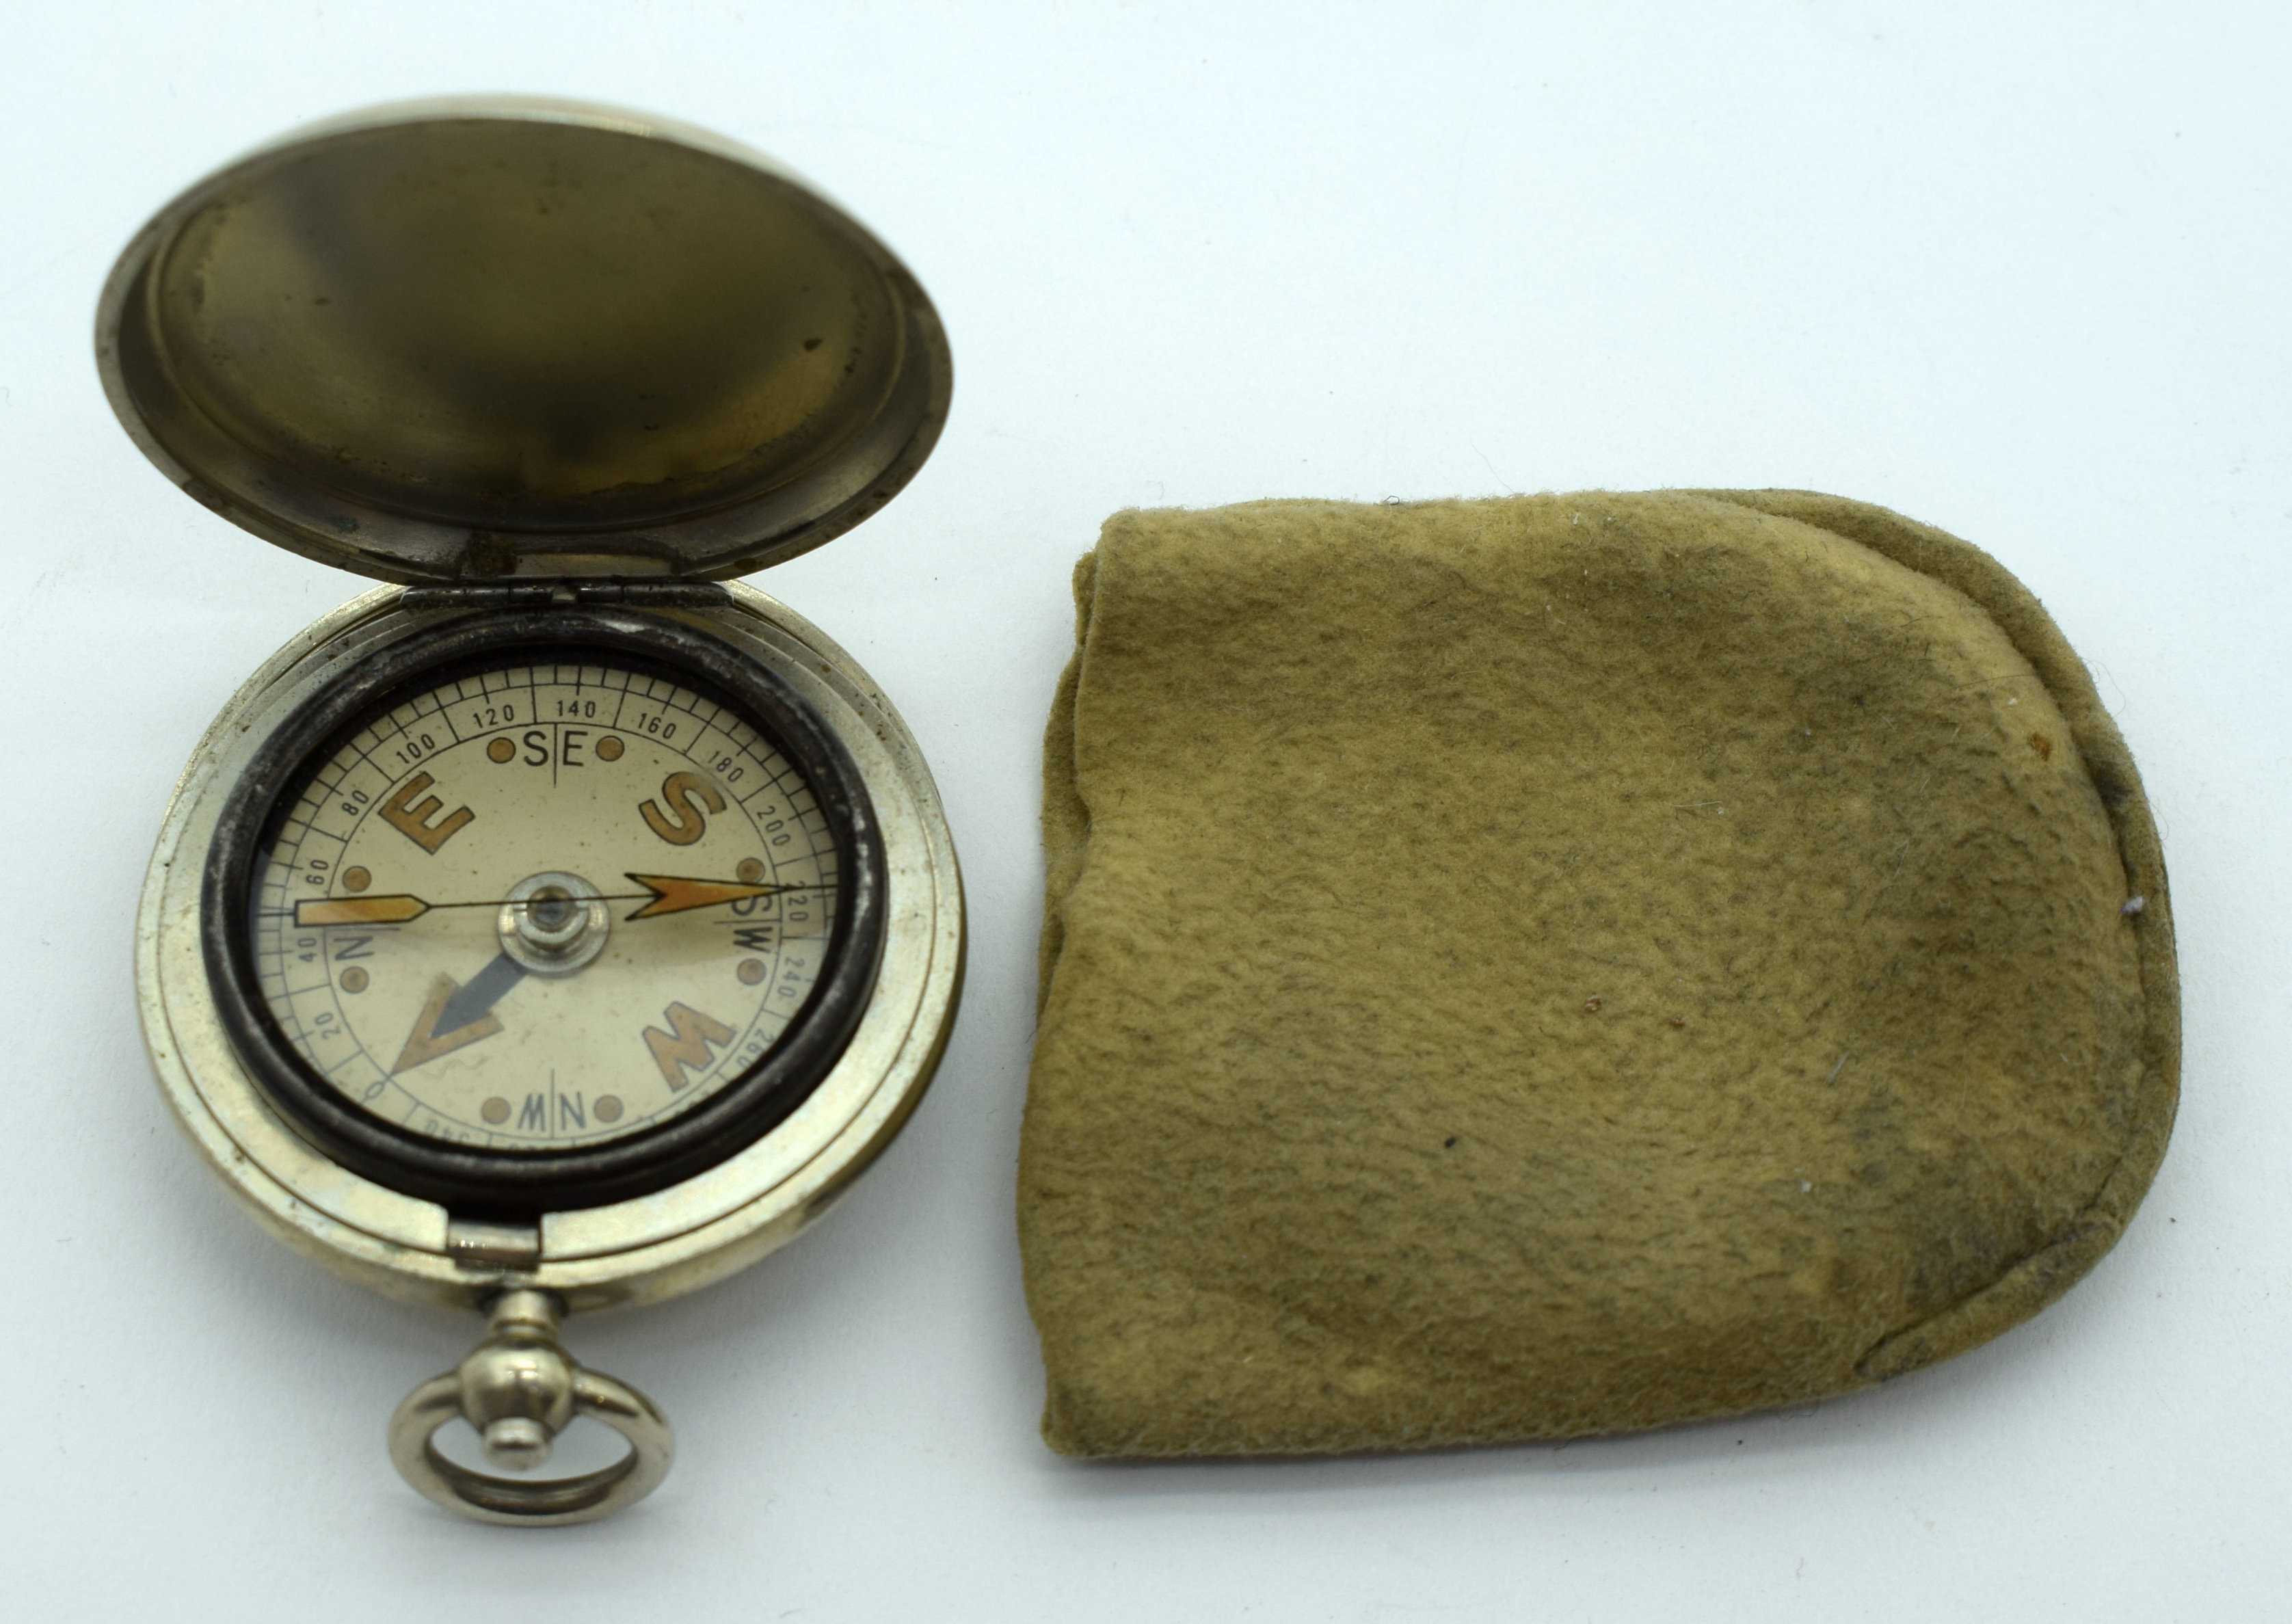 AN UNUSUAL EARLY 20TH CENTURY BASE METAL POCKET COMPASS possibly Military. 4 cm diameter.